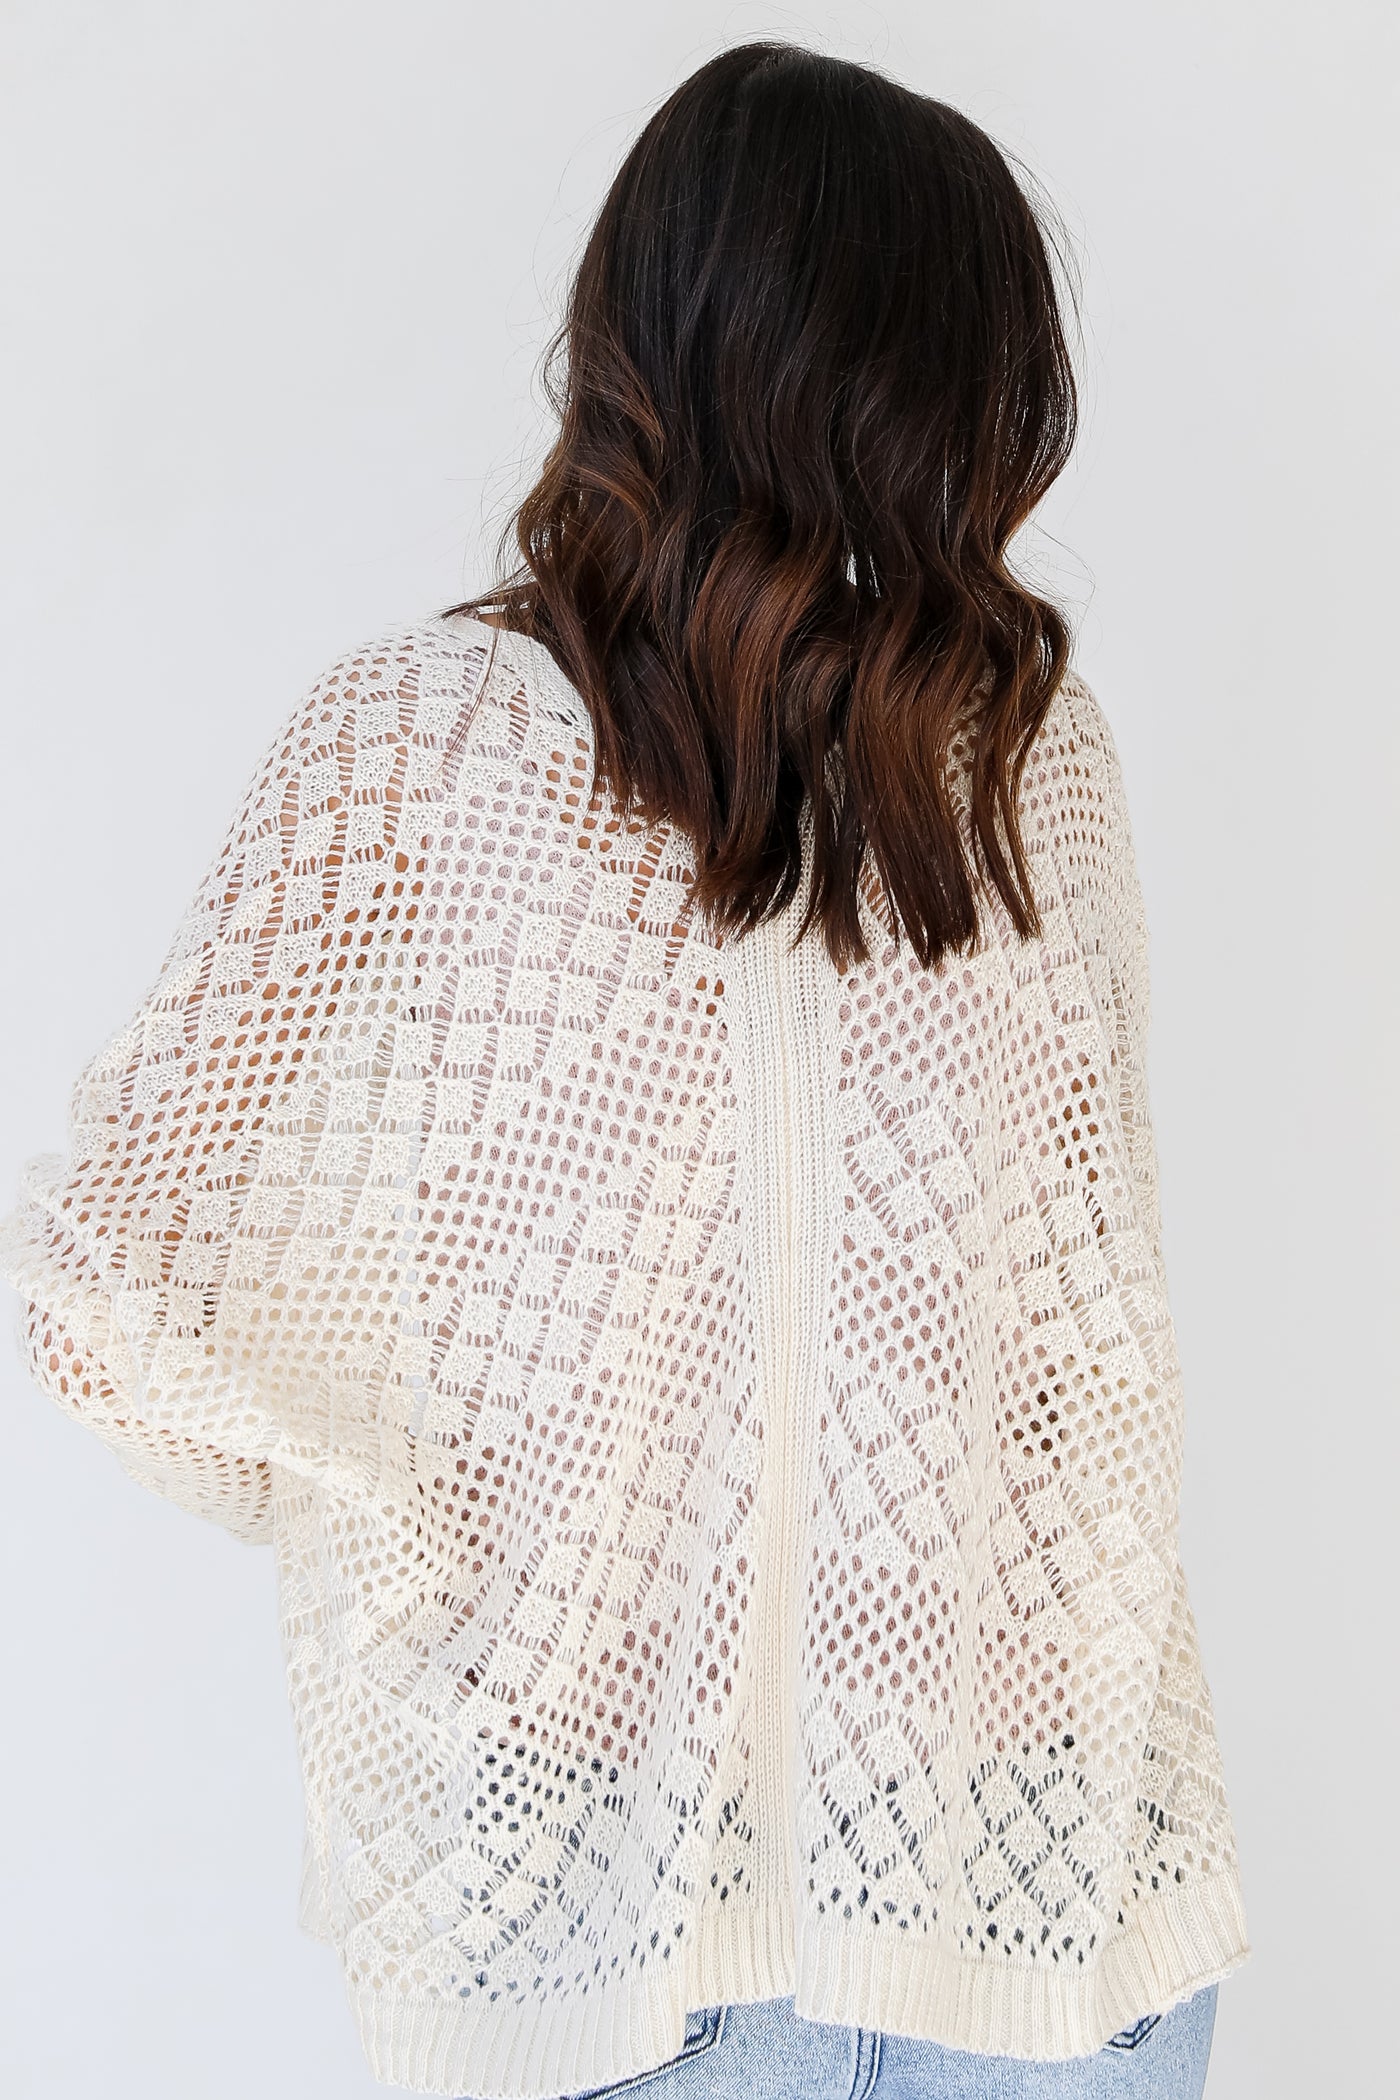 Crochet Knit Cardigan in ivory back view